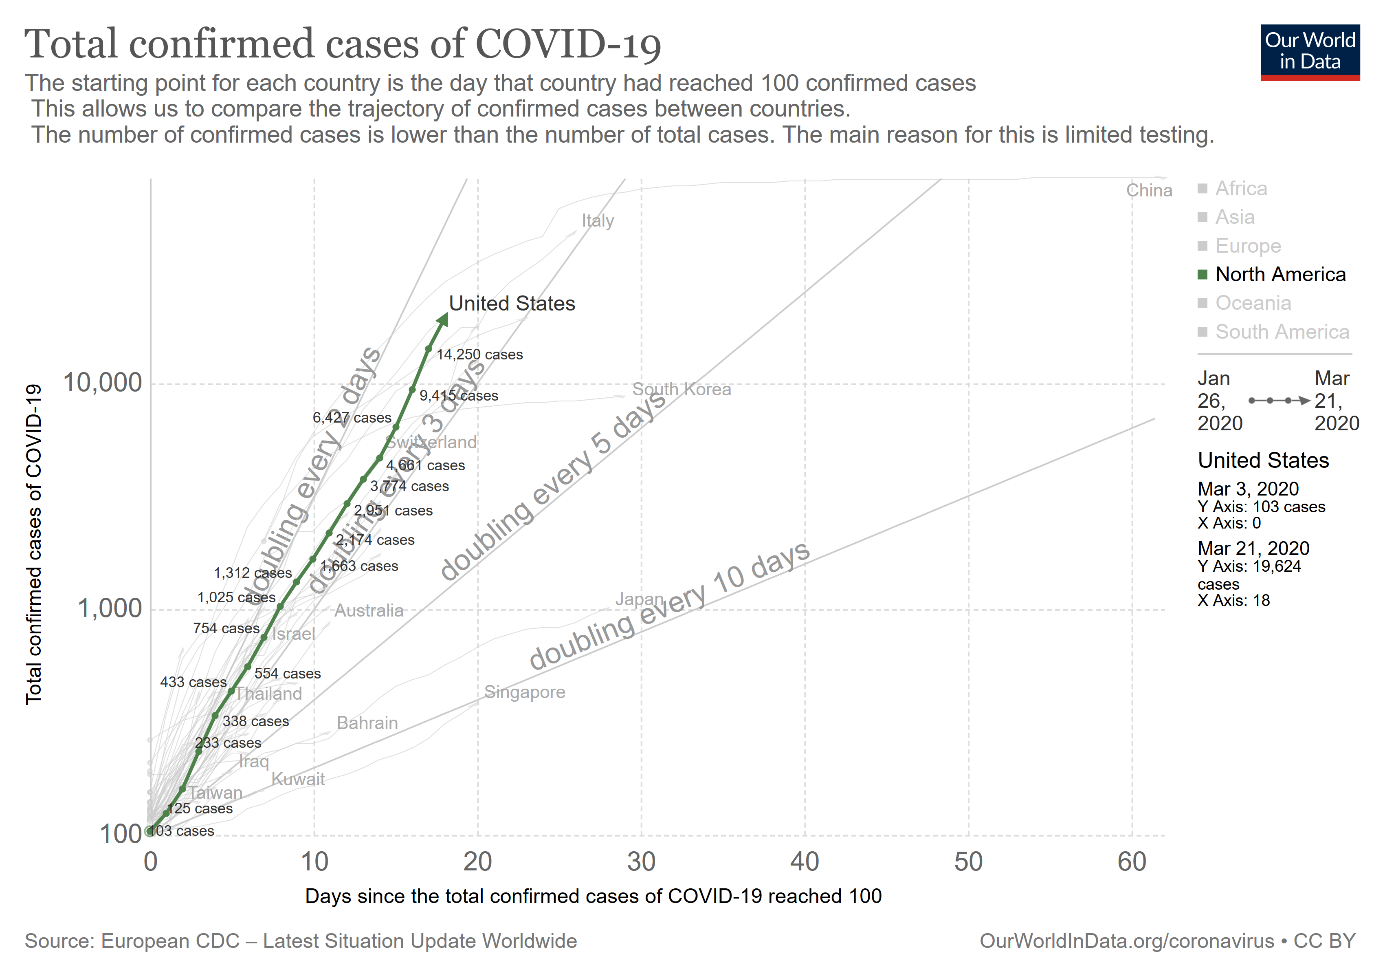 Total confirmed cases of COVID-19 in the US and other countries since the country reached 100 